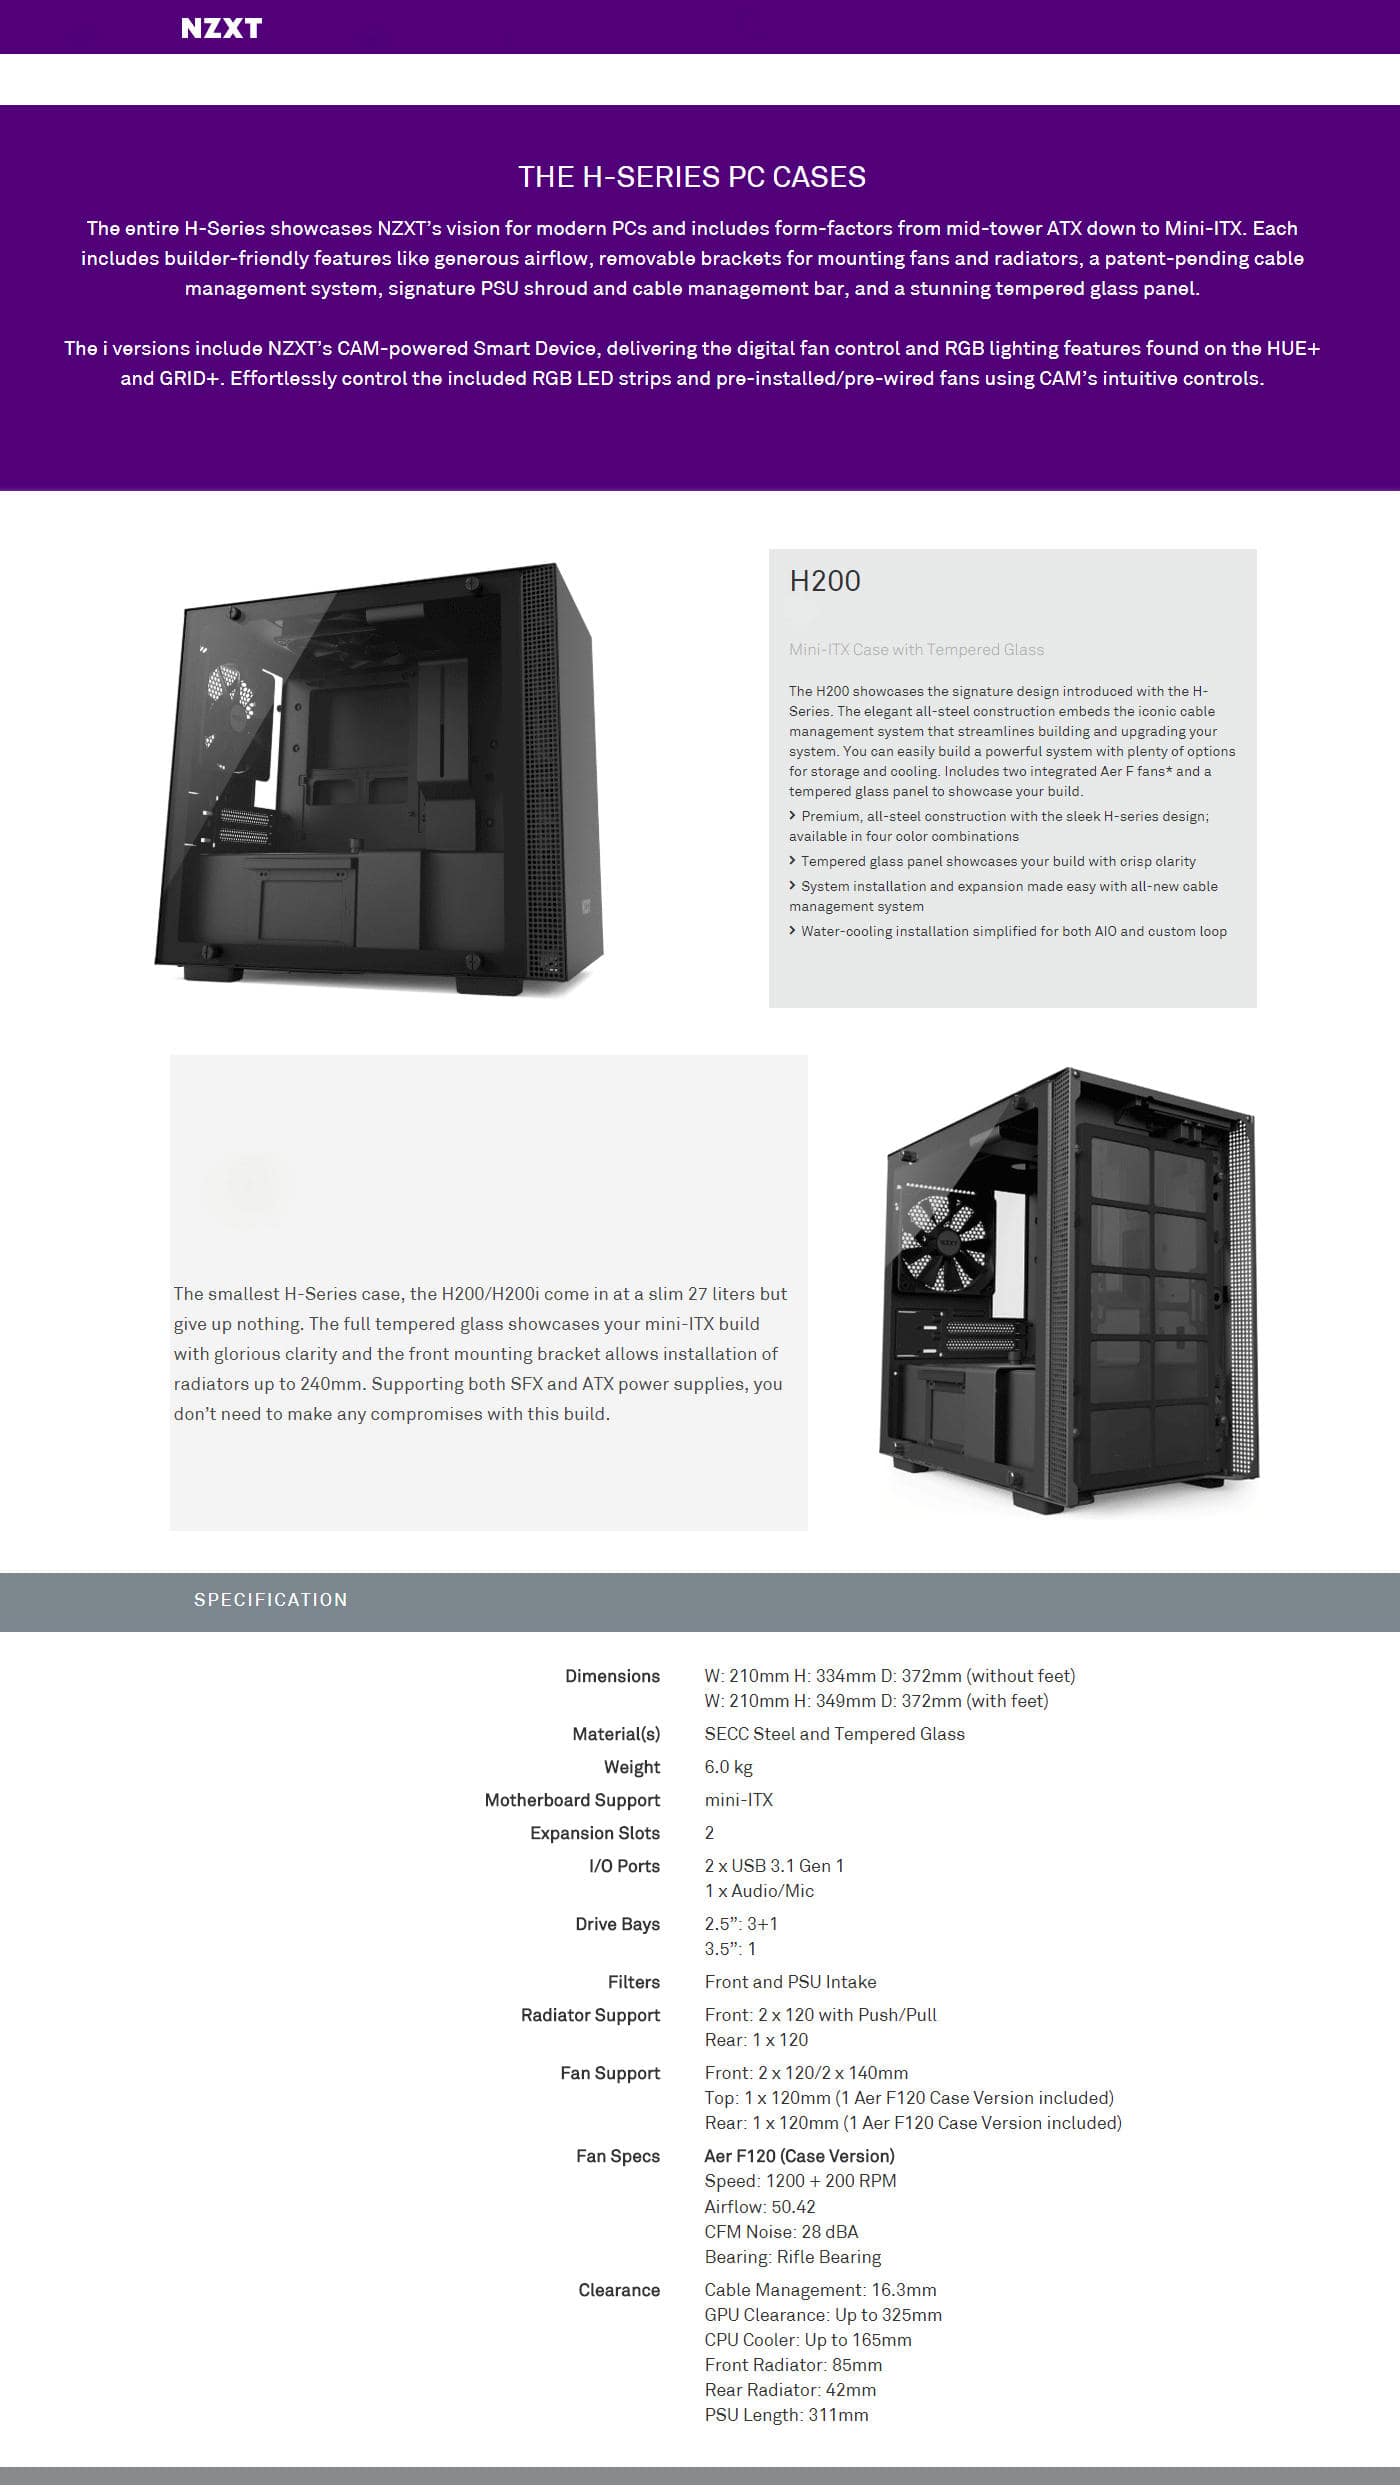  Buy Online Nzxt H200 Mini-ITX Case with Tempered Glass - Matte Black (CA-H200B-B1)